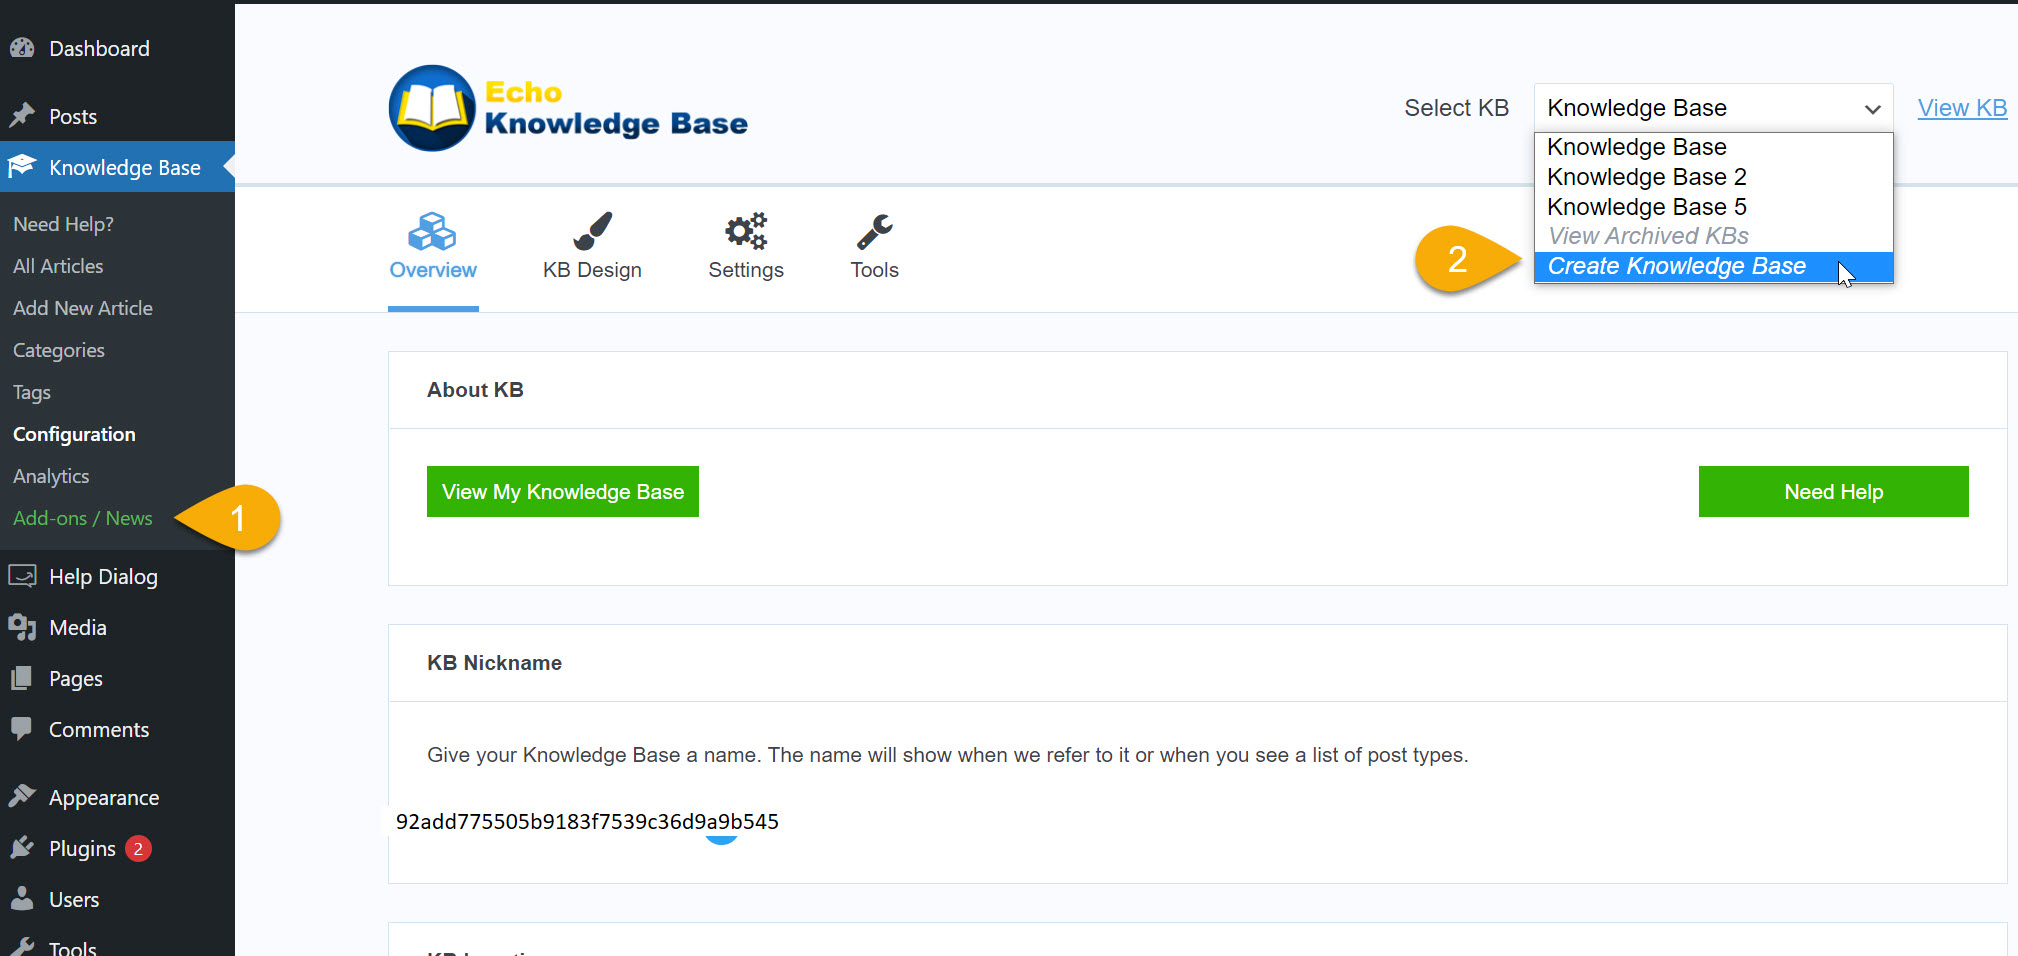 How to embed a video in your article – Presspage Knowledge Base